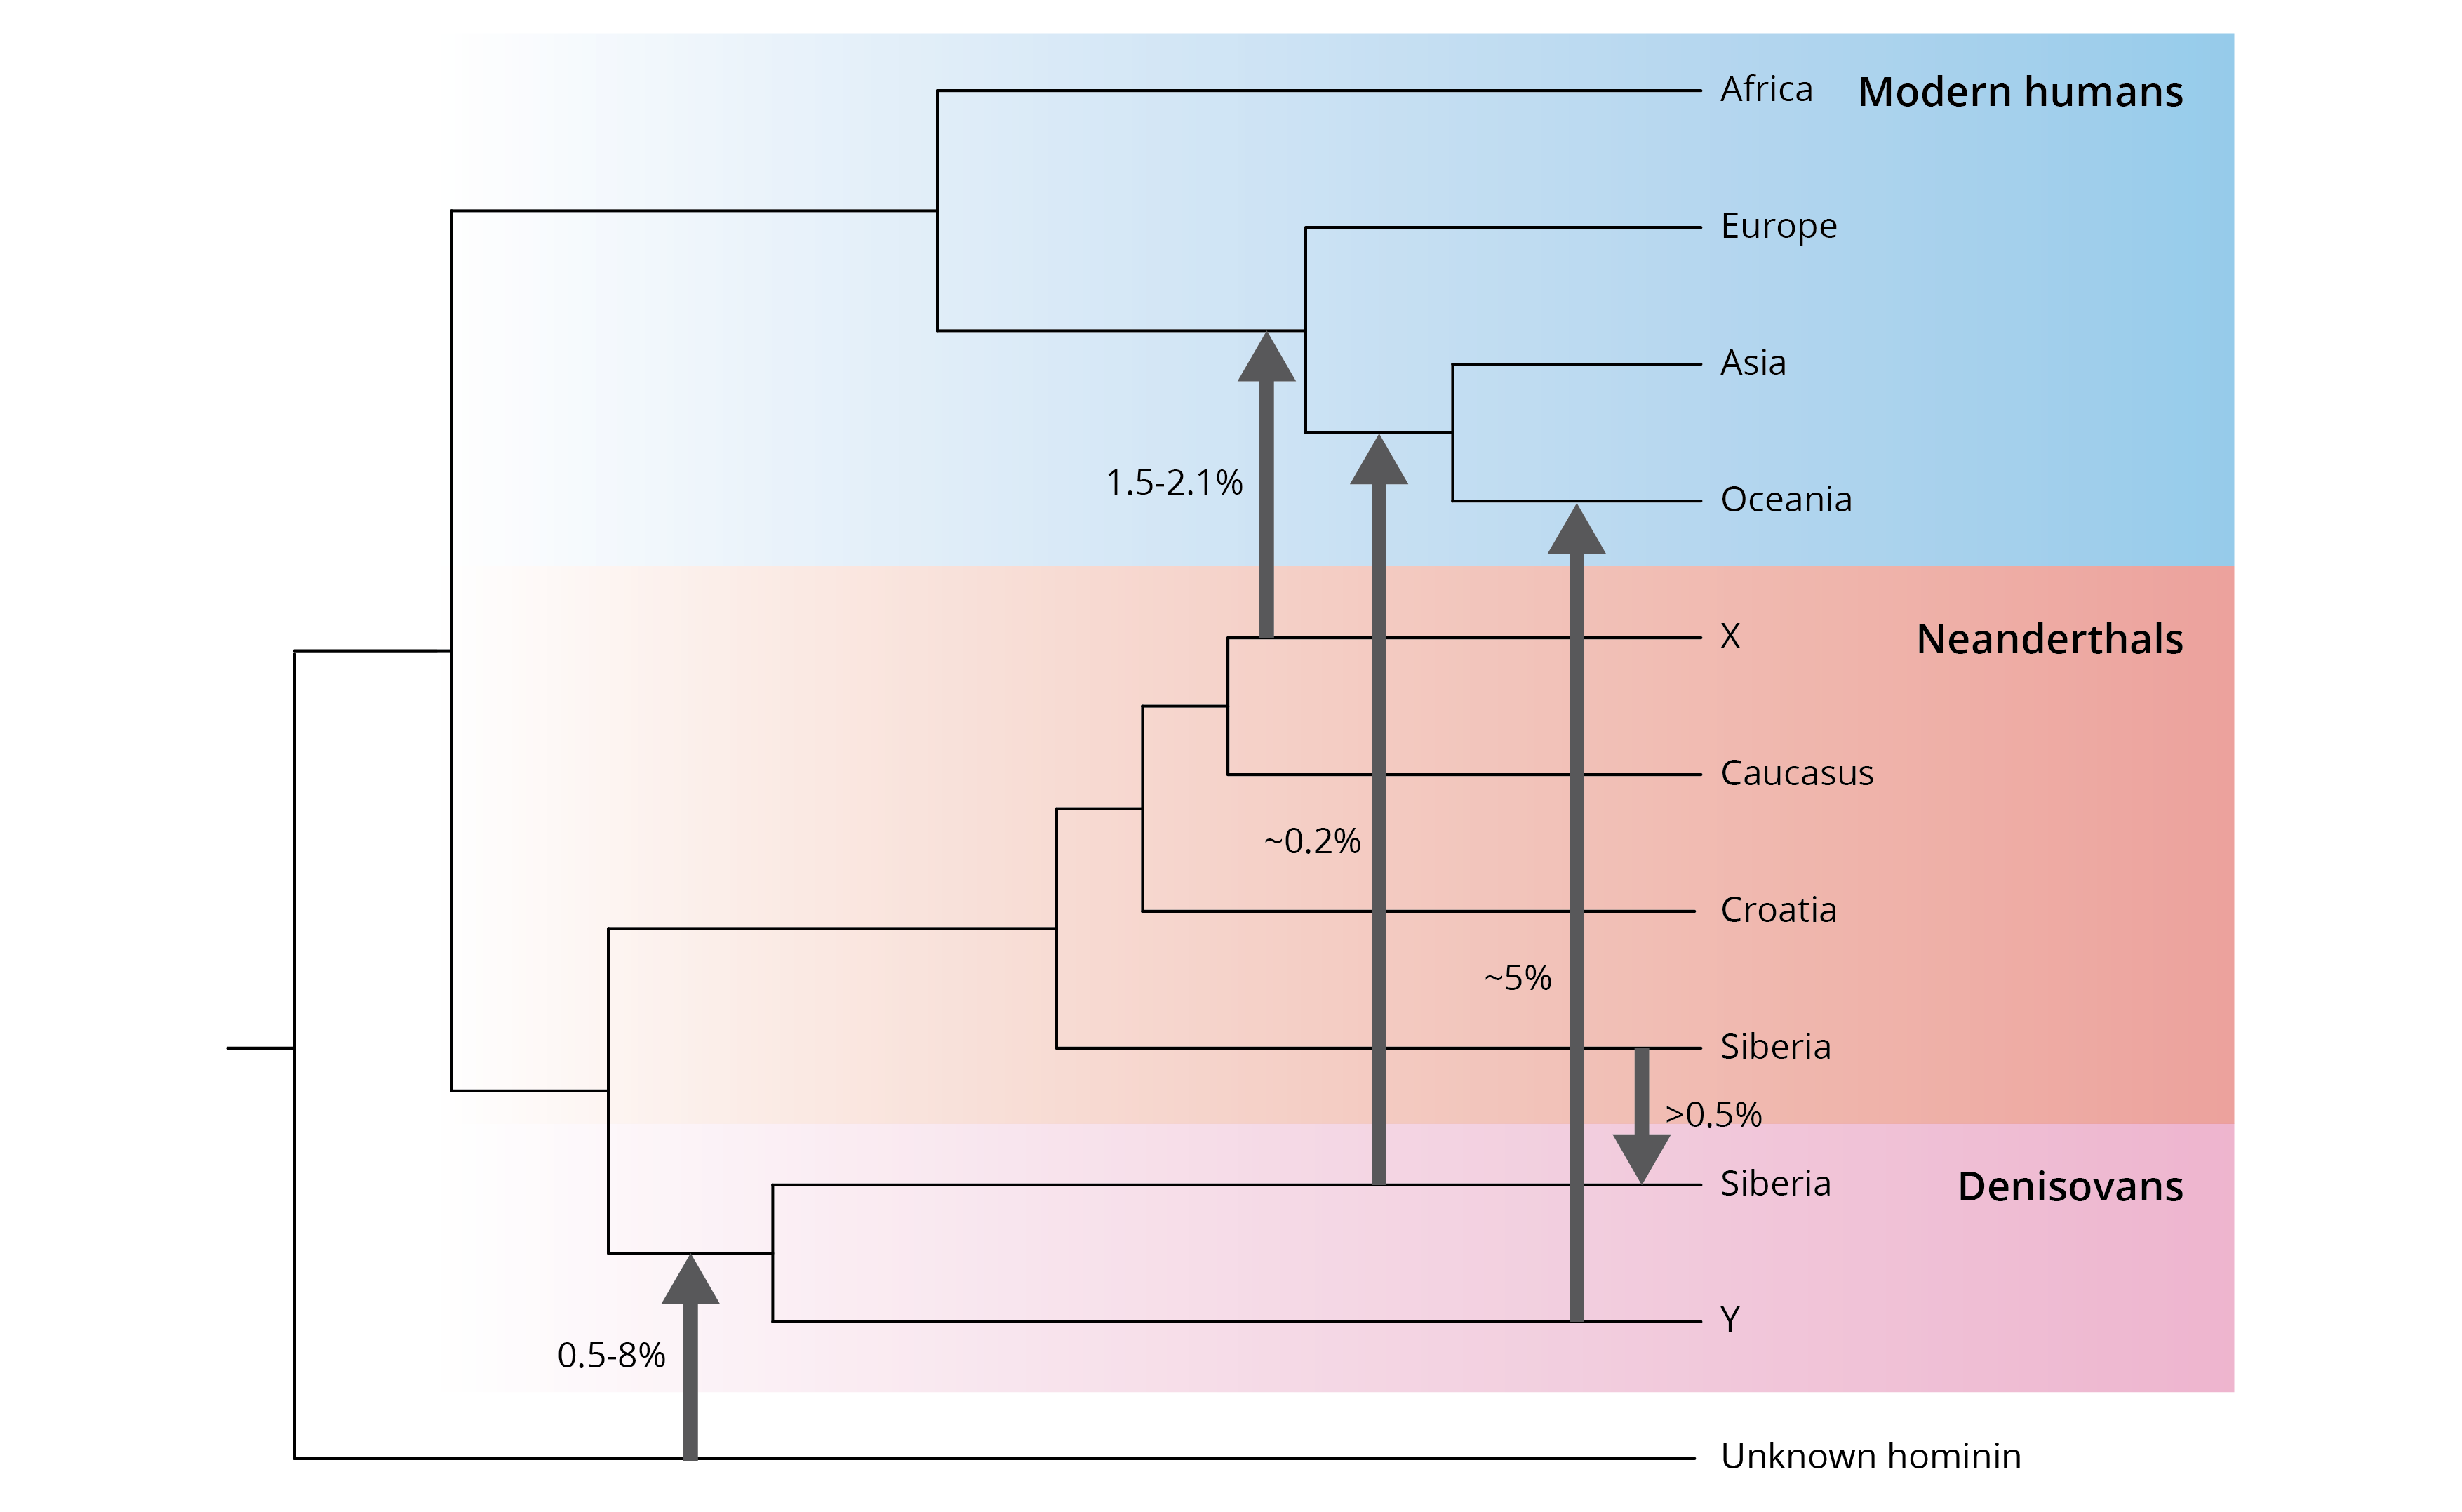 Patterns of historical gene flow between different lineages of pre-modern and modern *Homo*. Adopted from Pfrüfer et al. (2014).